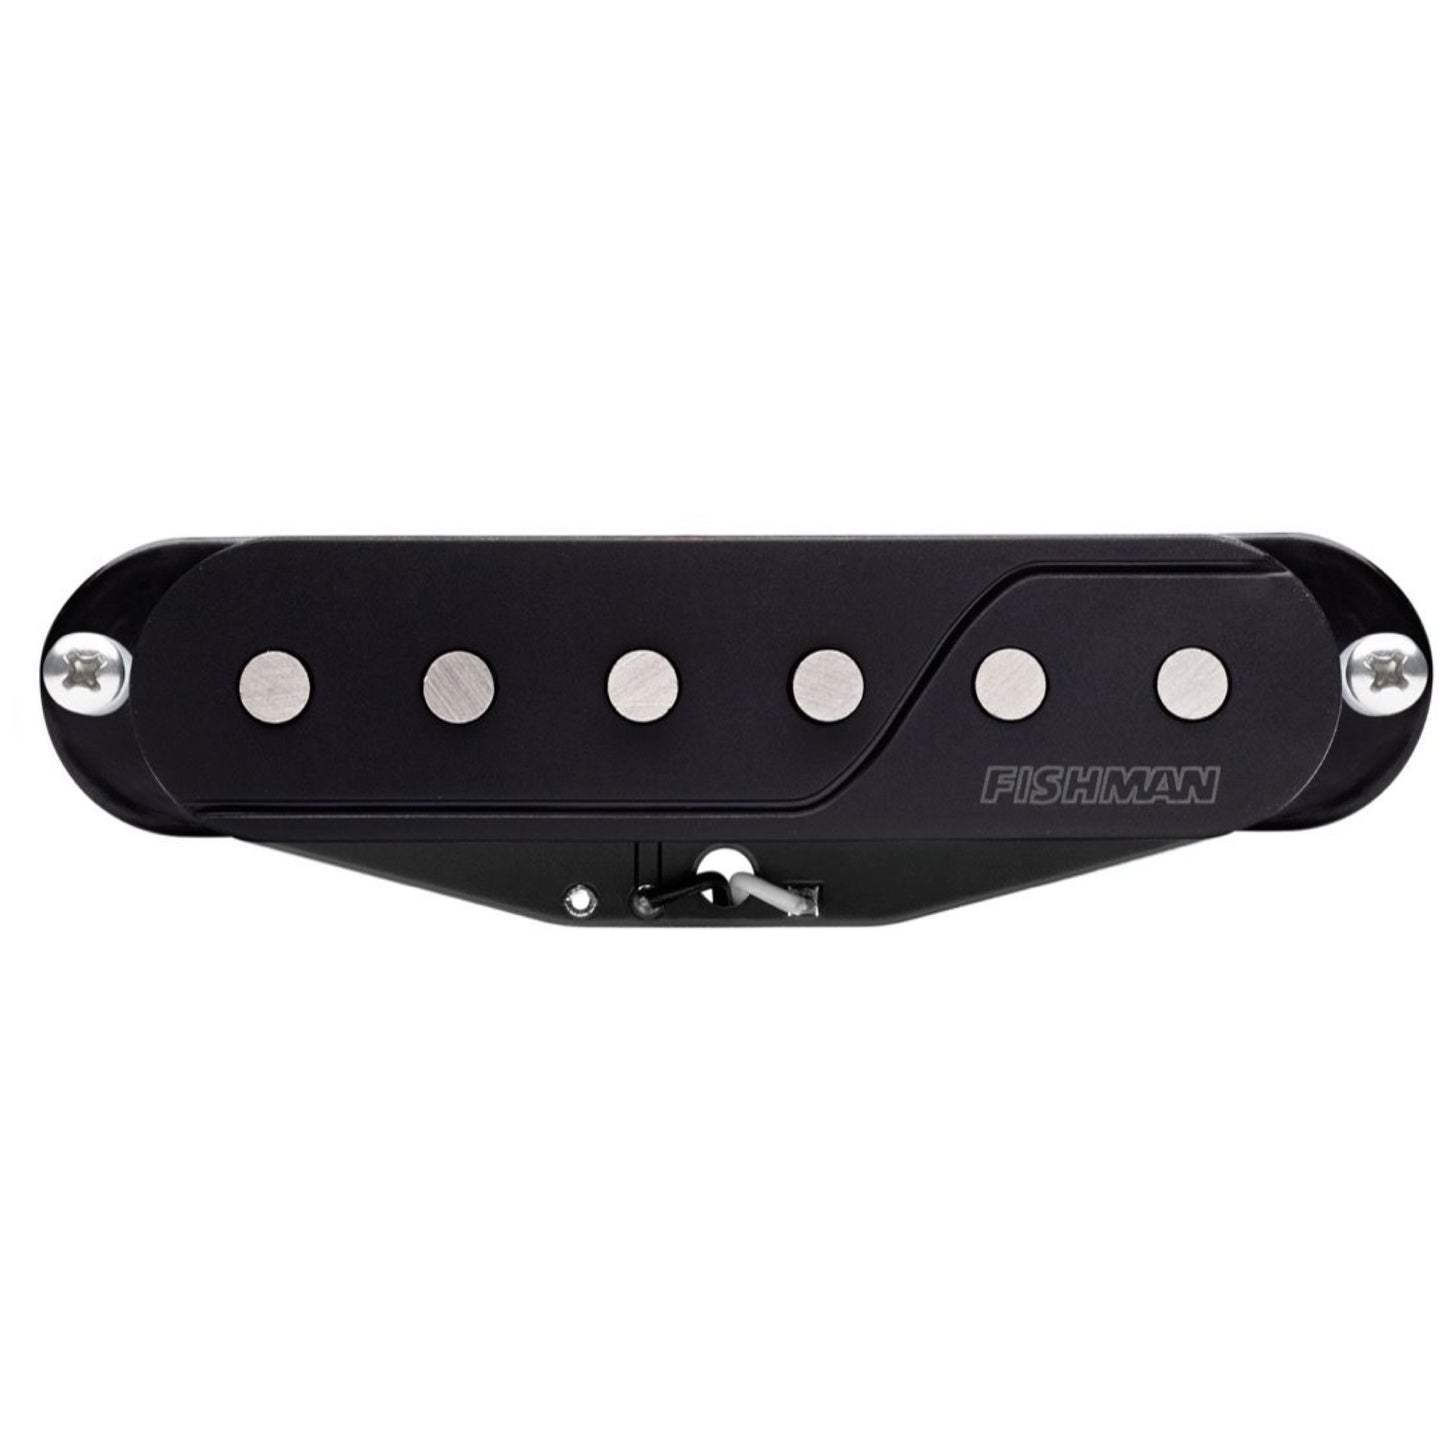 Fishman Fluence SS Single Width Pickup Active Guitar Pickup, with Black and White Caps Included